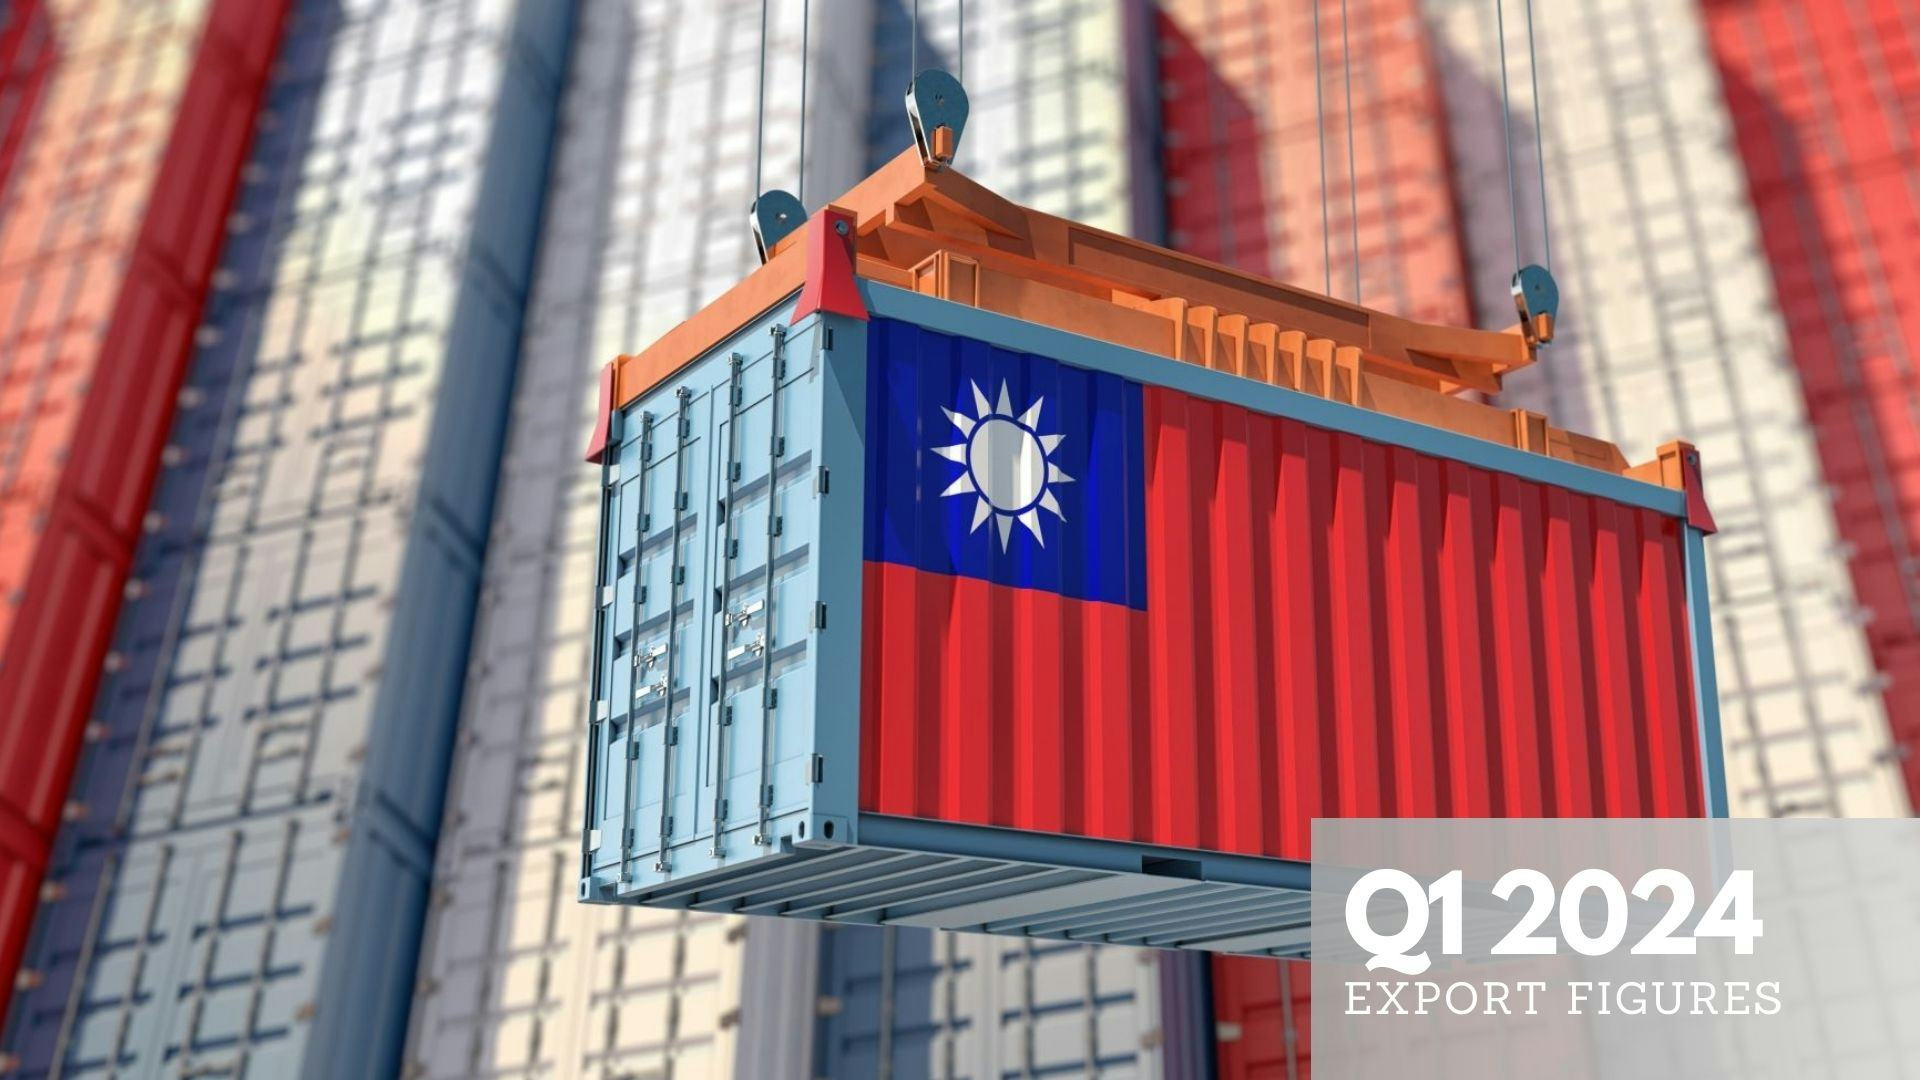 With 57,366 units exported in Q1 2024,  is the lowest Q1 export volume to EU markets from Taiwan since 2018. - Photo Shutterstock